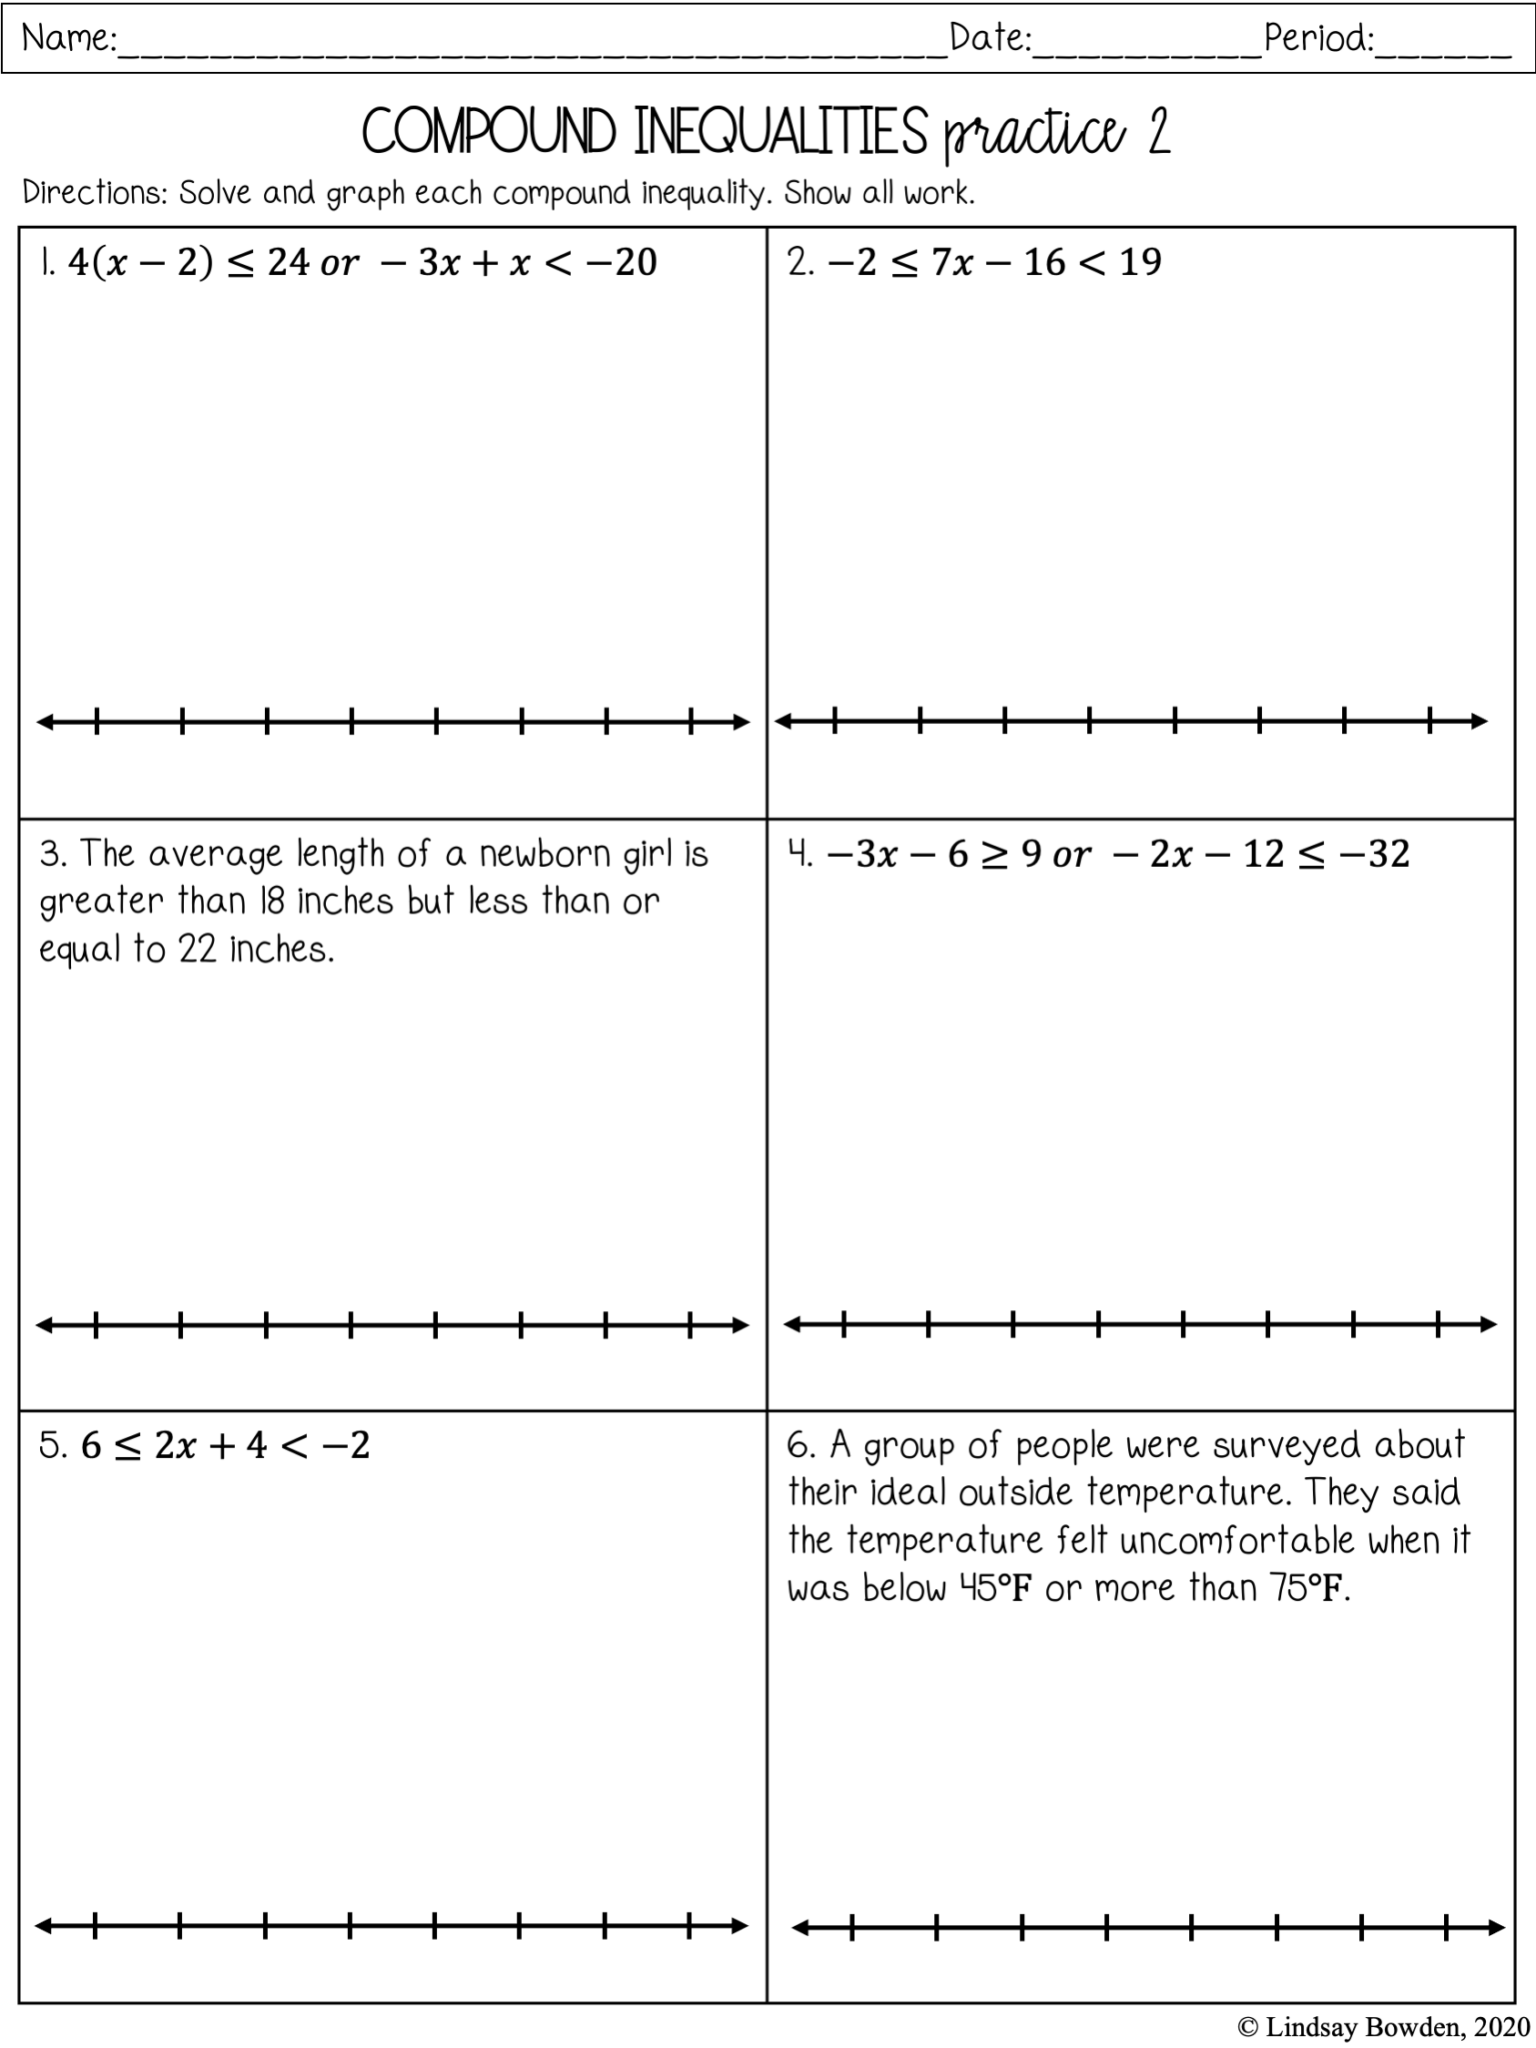 Compound Inequalities Notes And Worksheets Lindsay Bowden